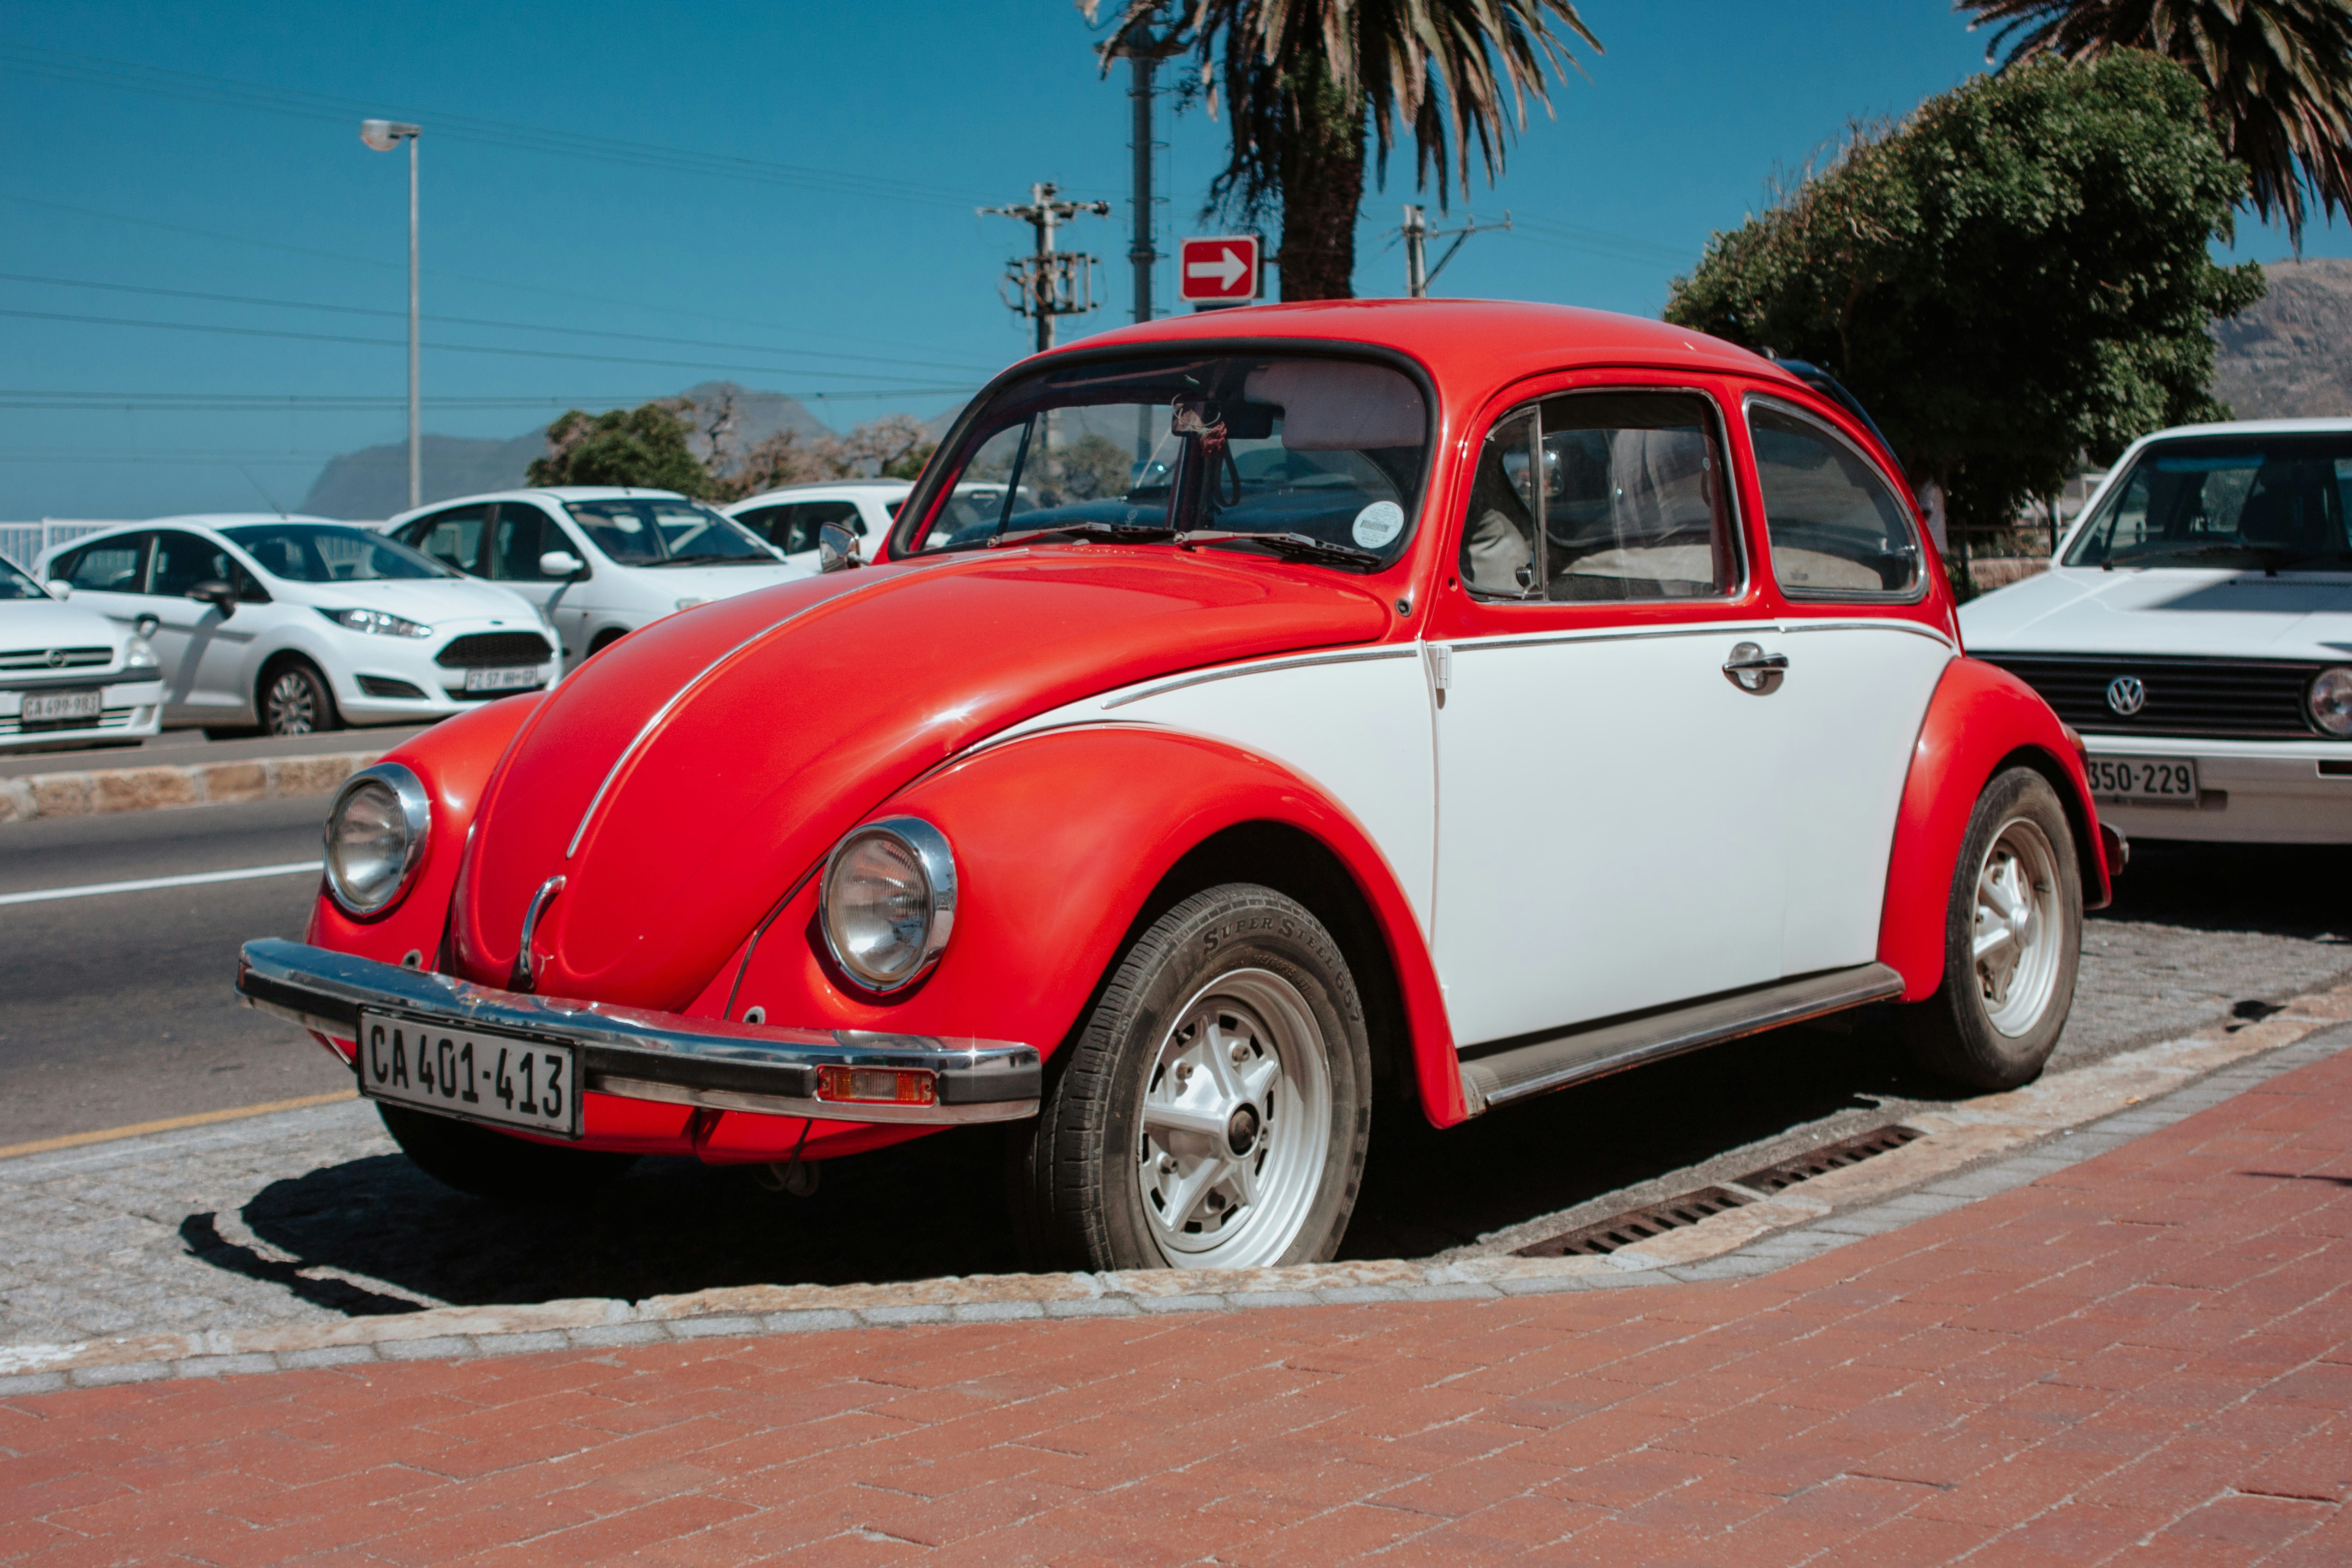 red and white Volkswagen beetle parked on side of road